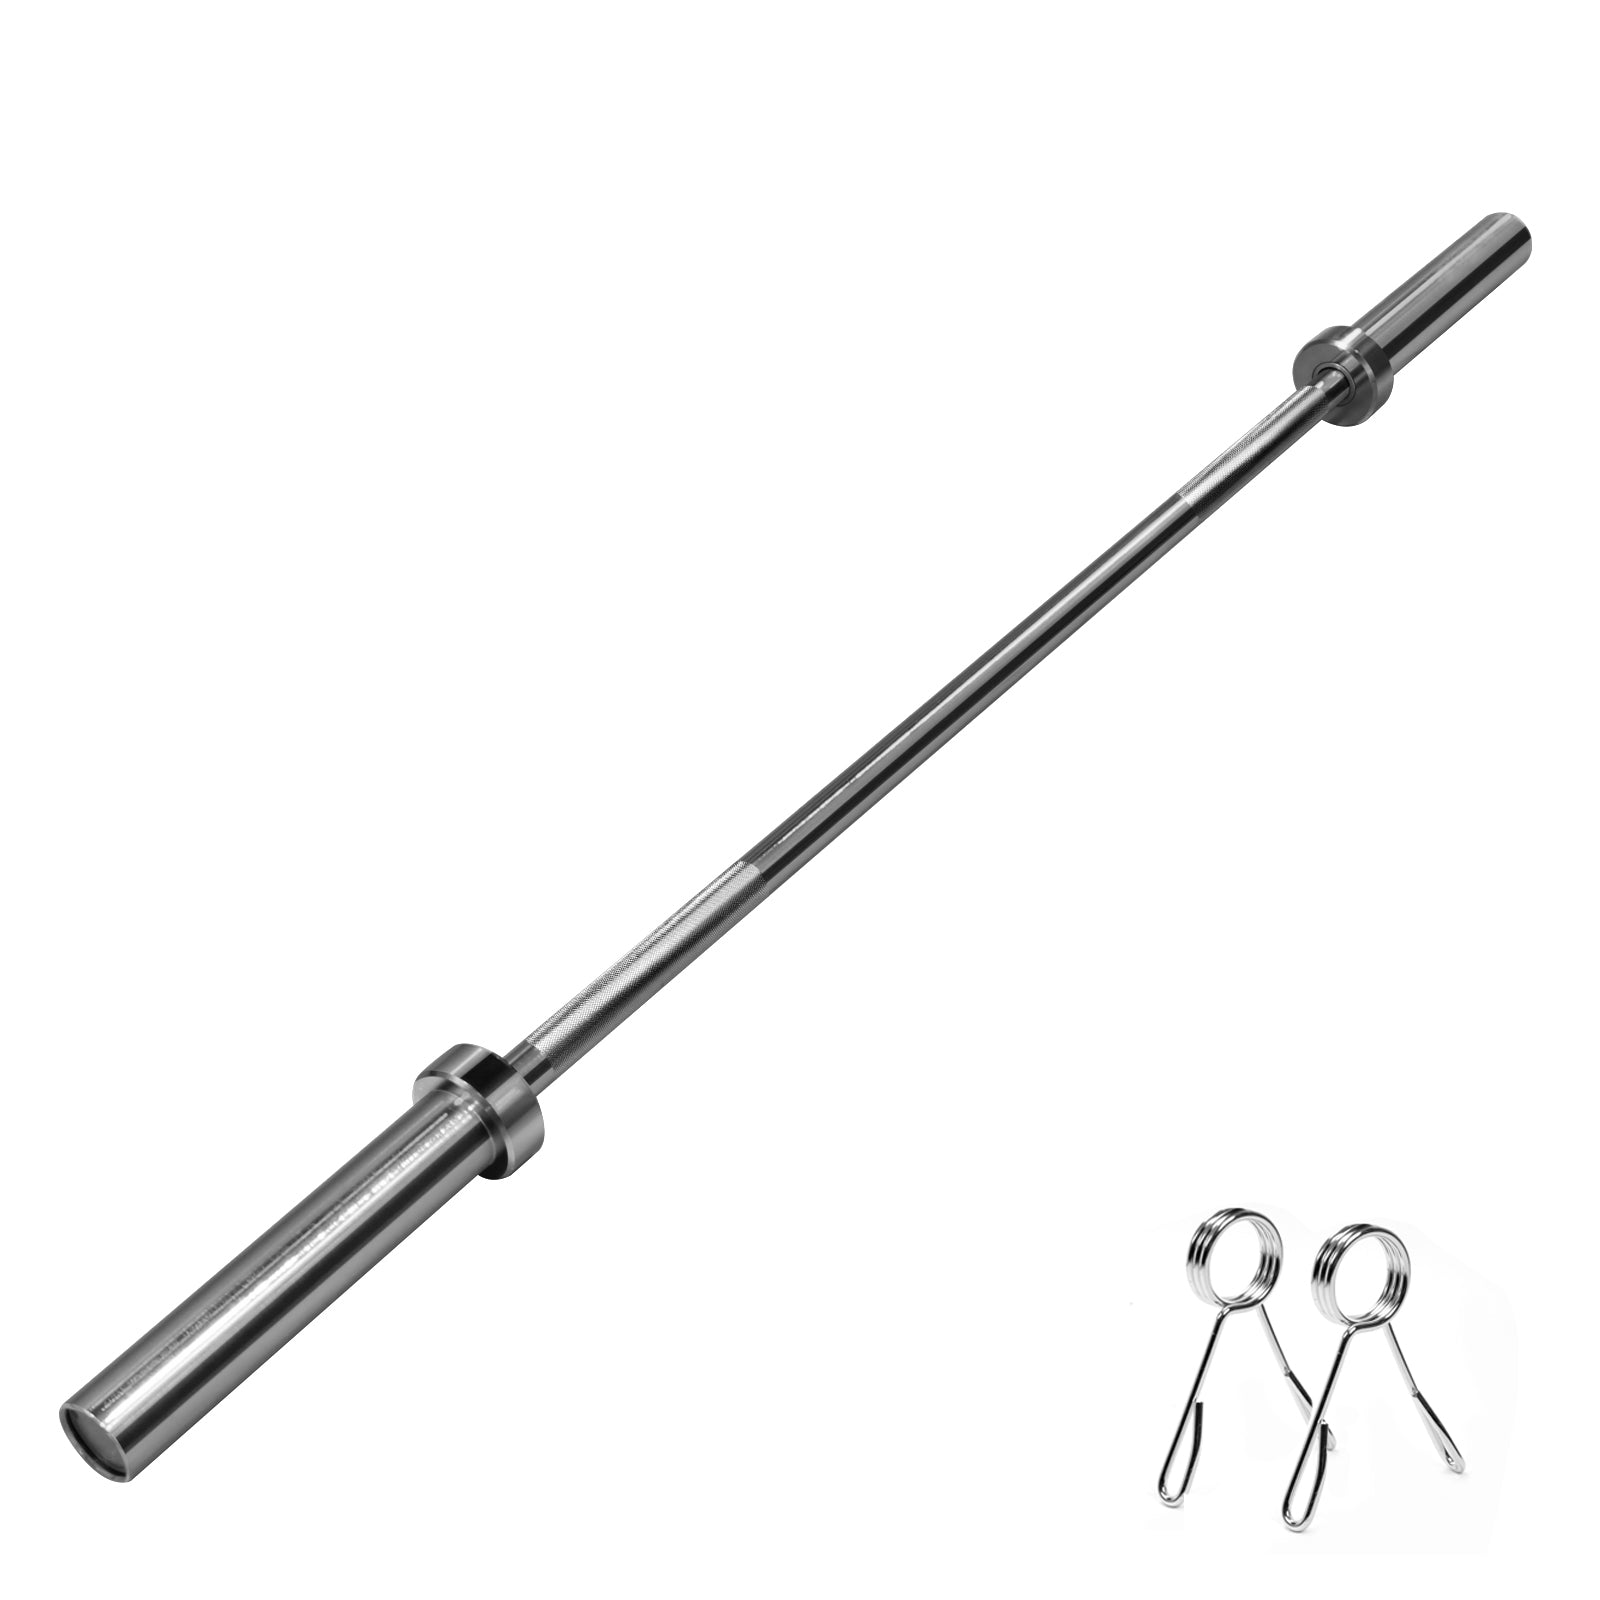 5 FT OLYMPIC WEIGHTLIFTING BARBELL WITH SPRING COLLARS